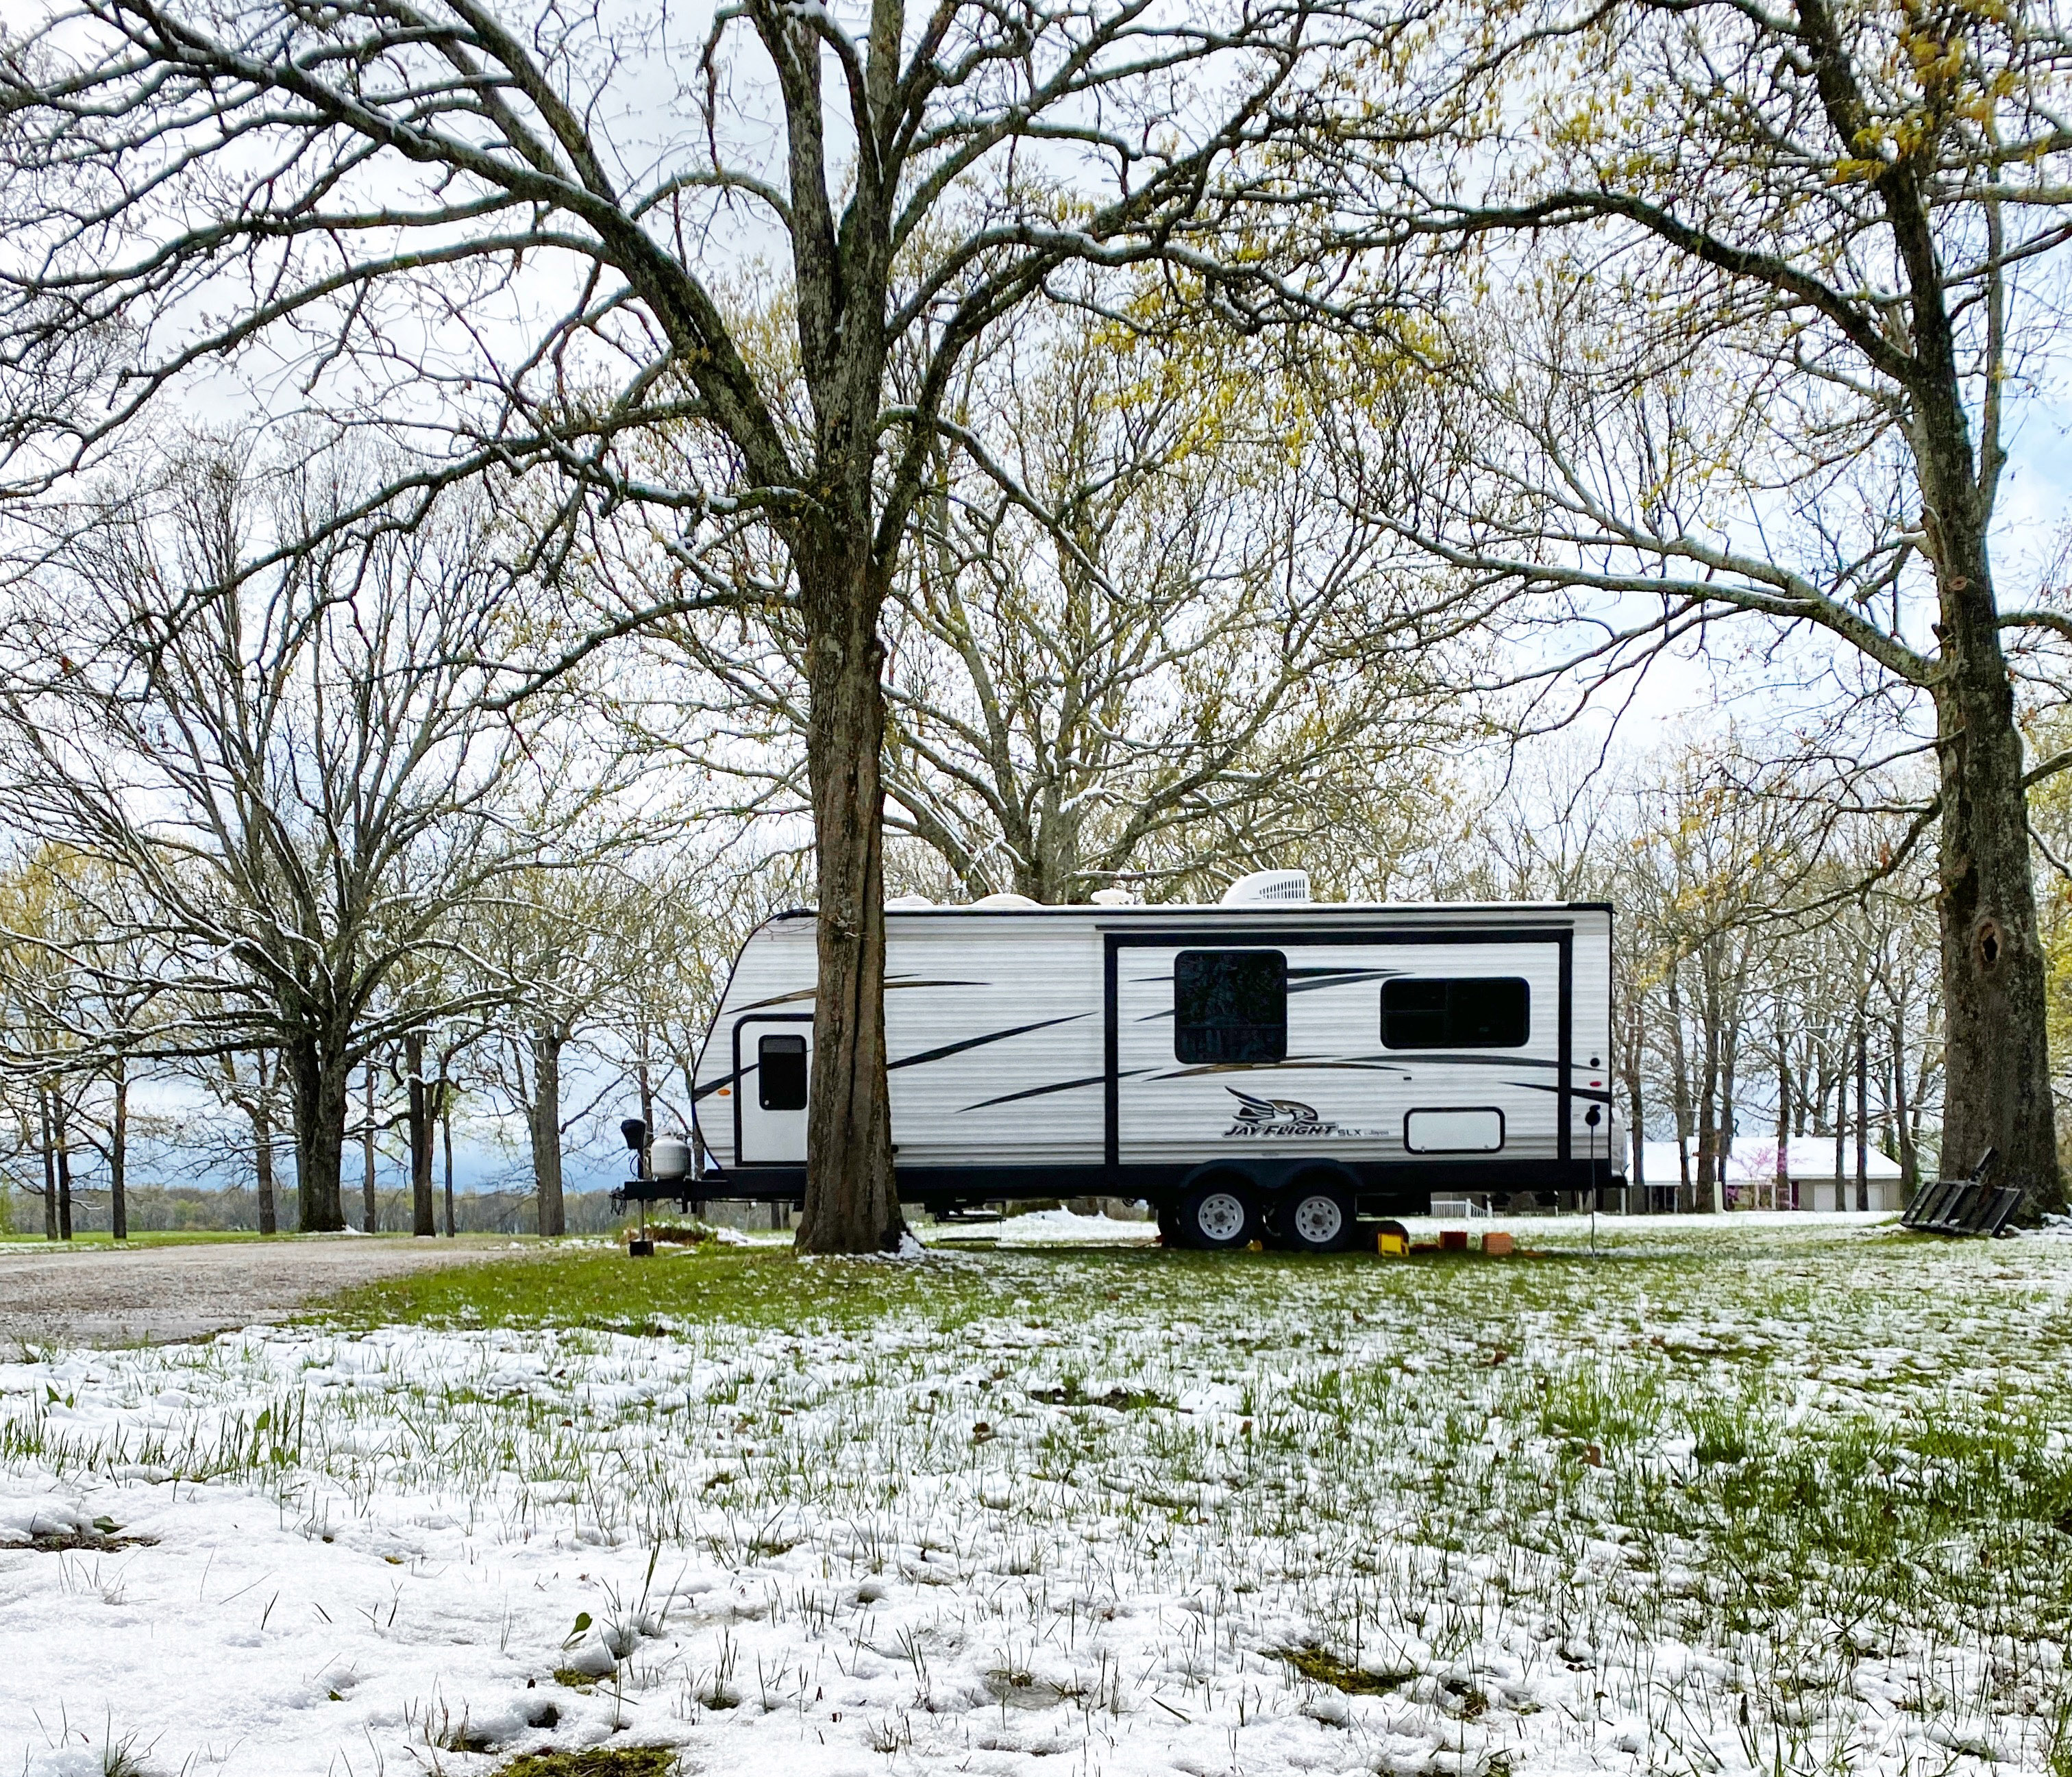 Travel trailer parked on a snowy meadow under spring trees.